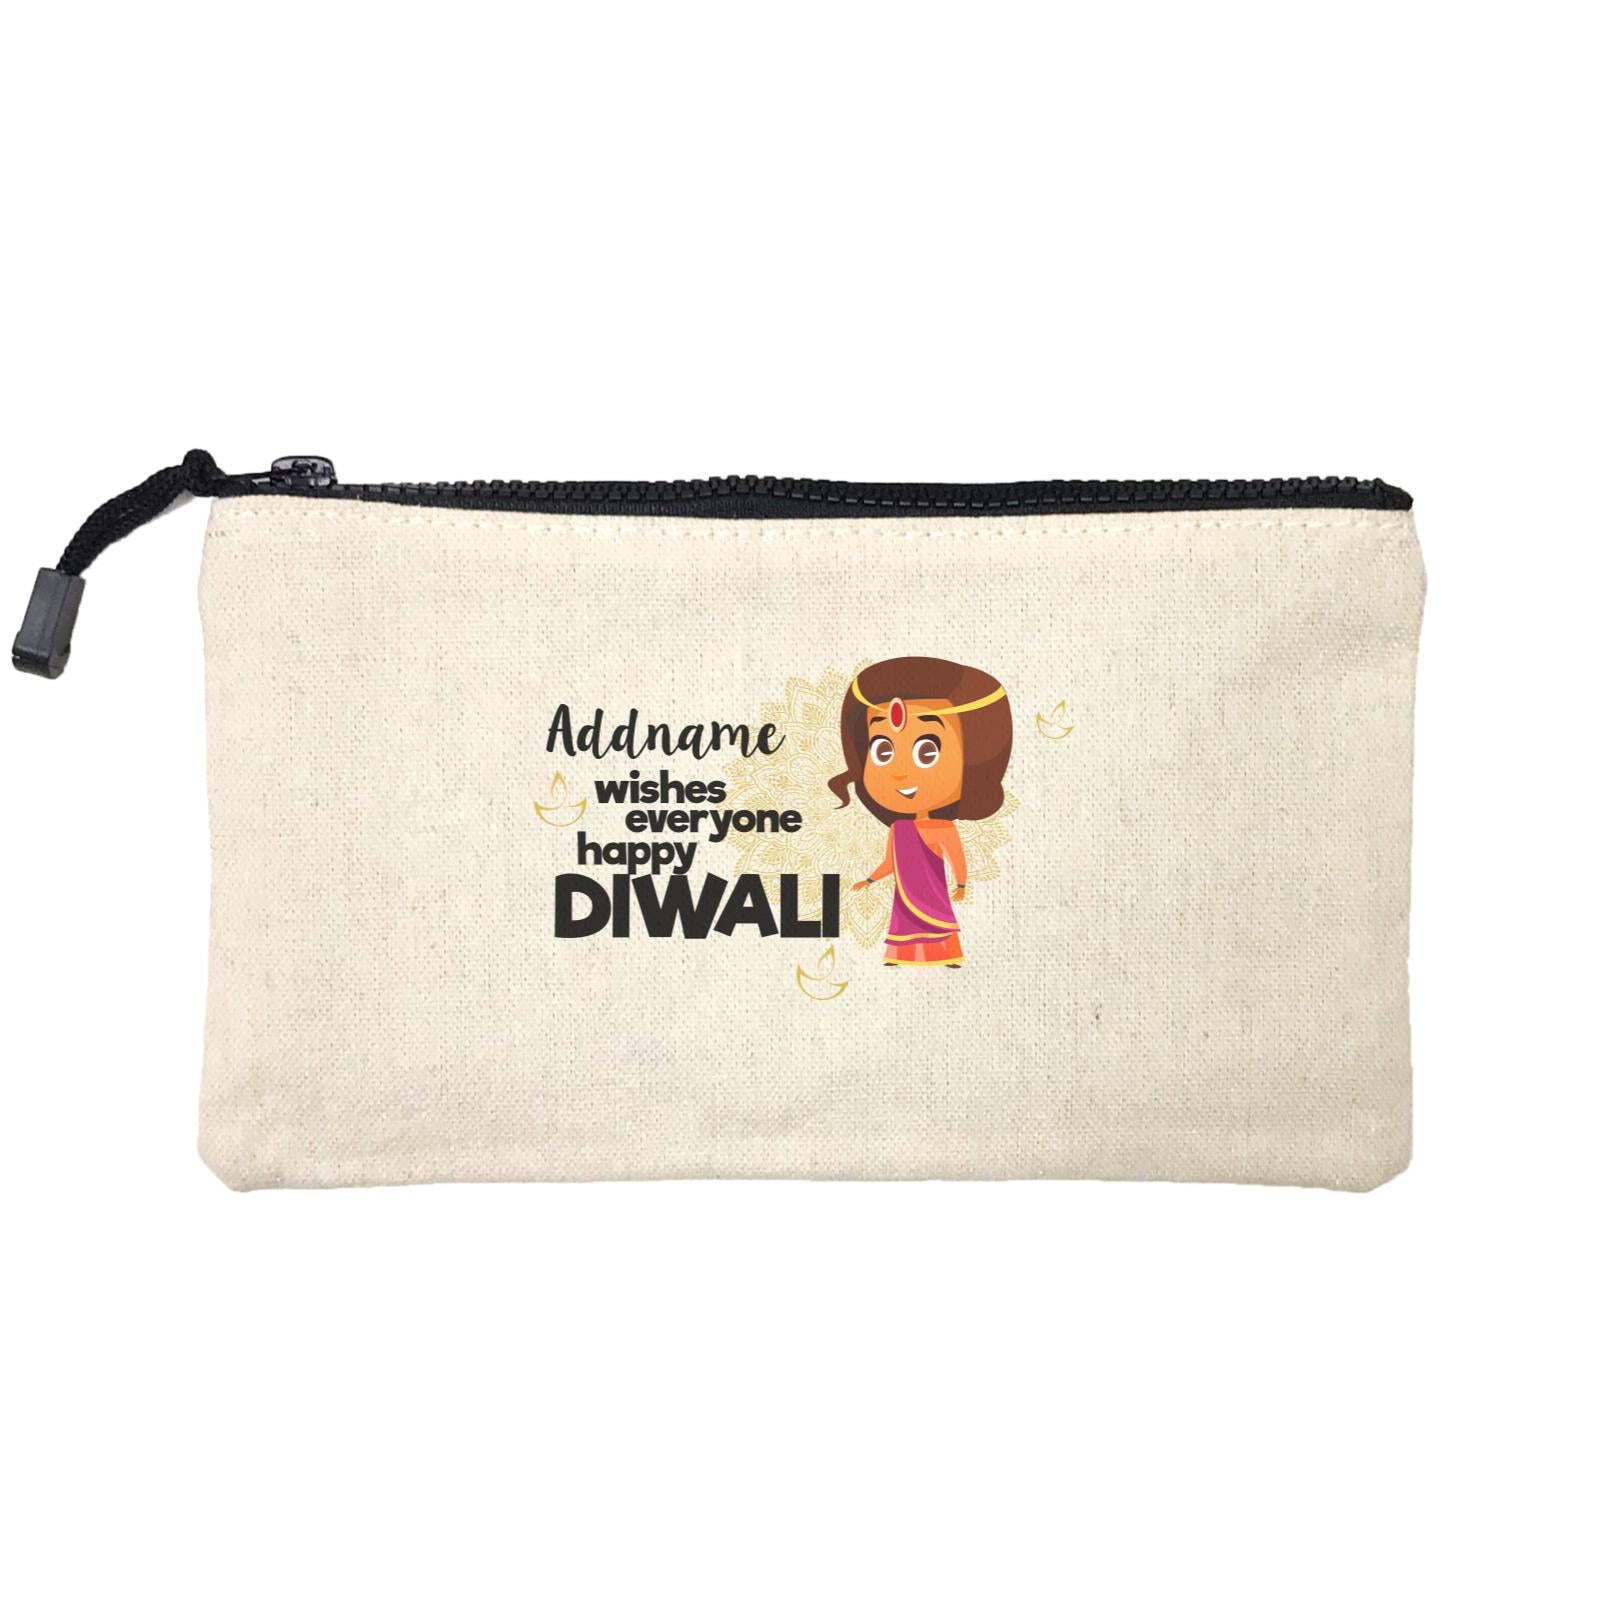 Cute Girl Wishes Everyone Happy Diwali Addname Mini Accessories Stationery Pouch